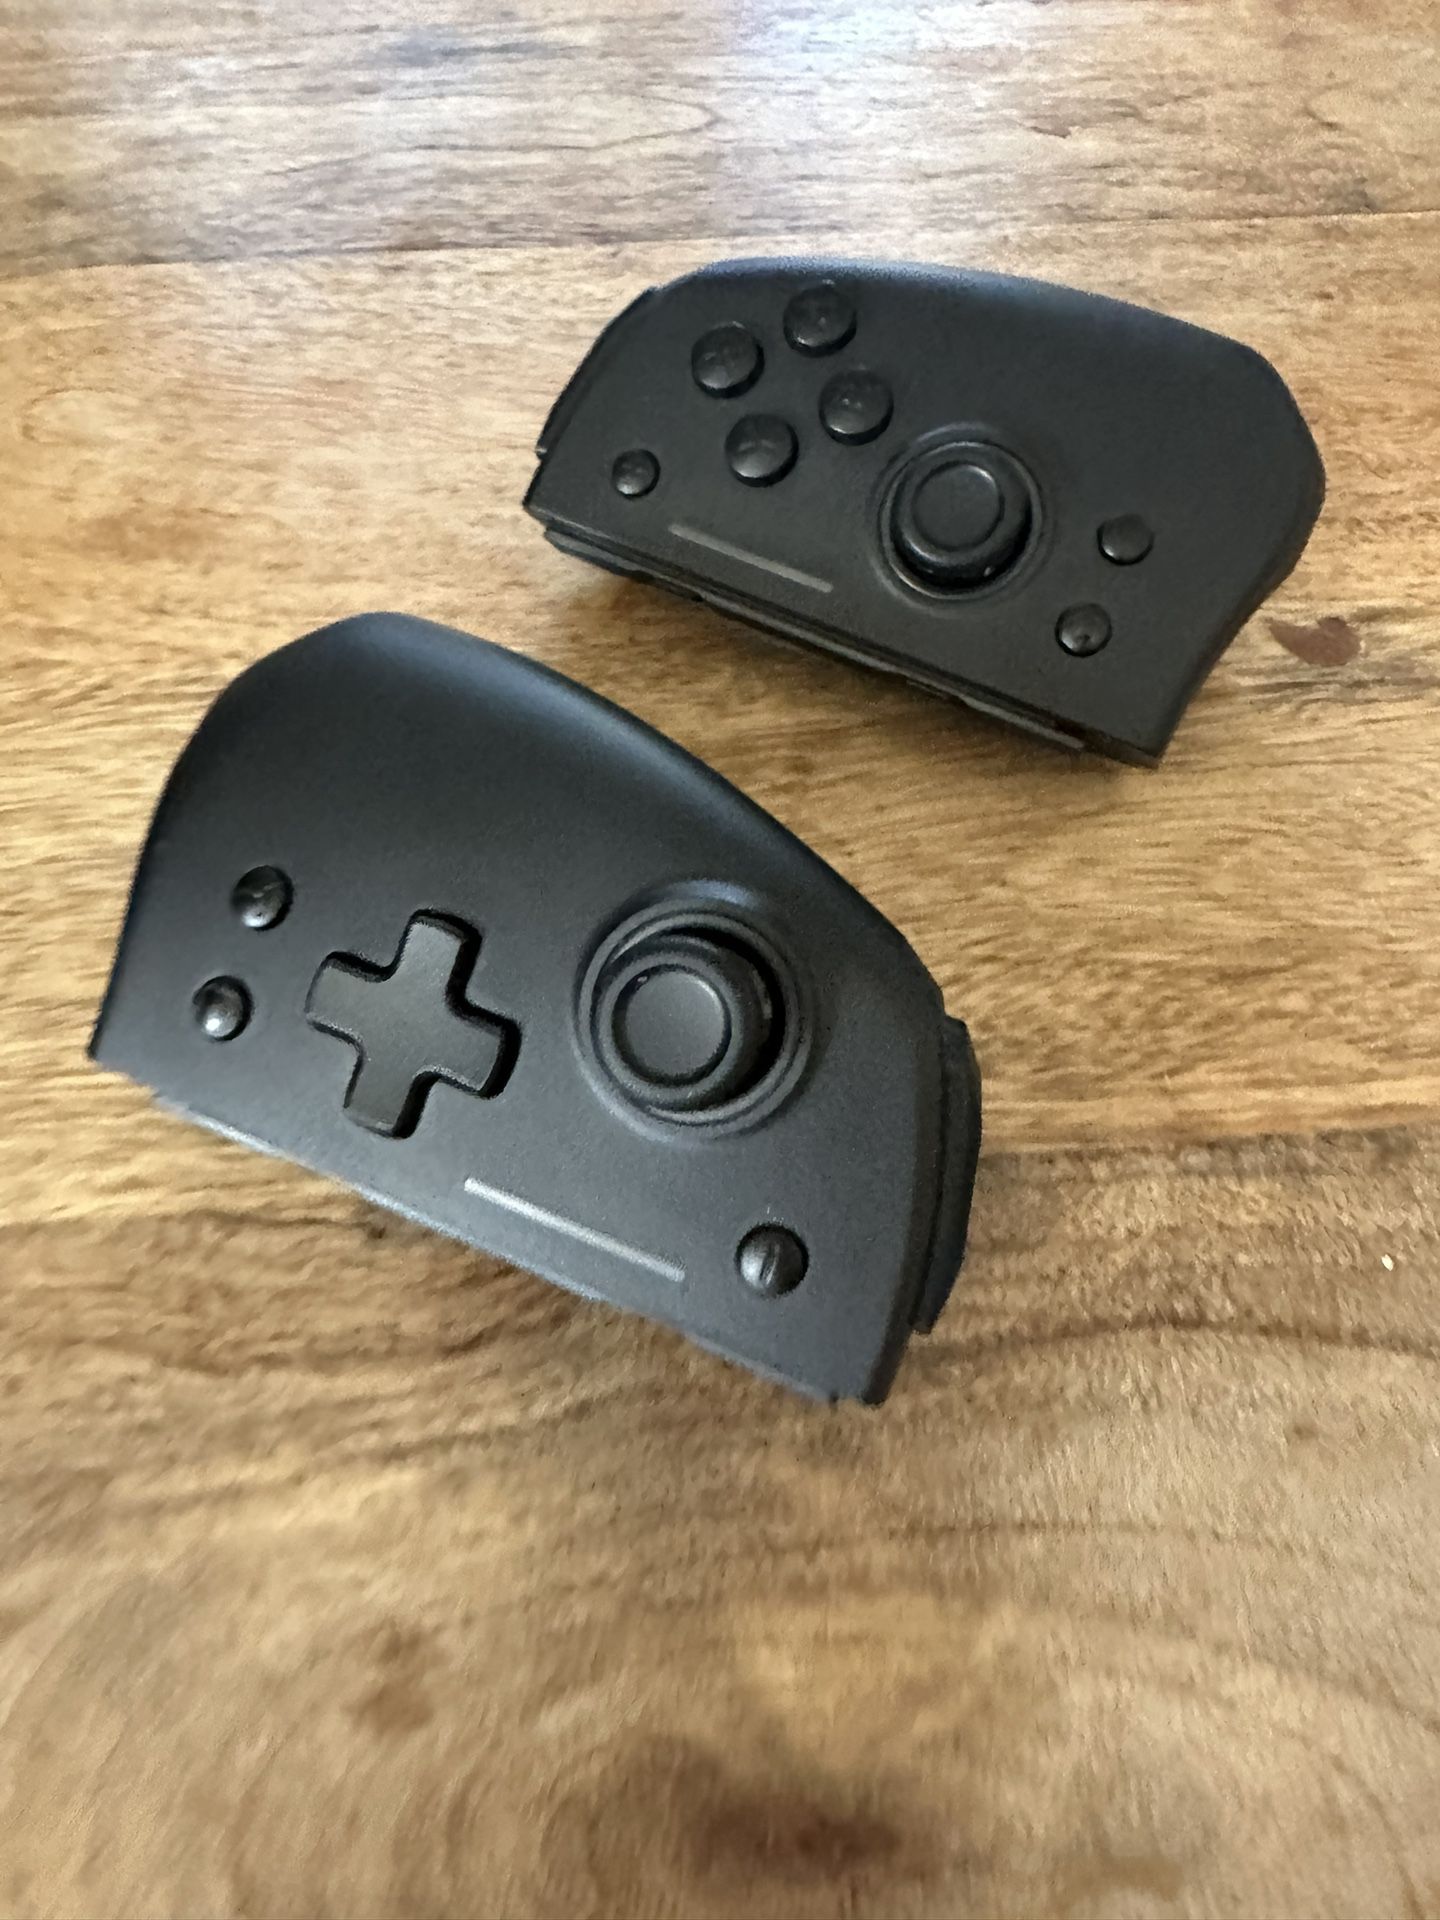 Nyxi Wizard Switch Controller for Sale in Aurora, IL - OfferUp